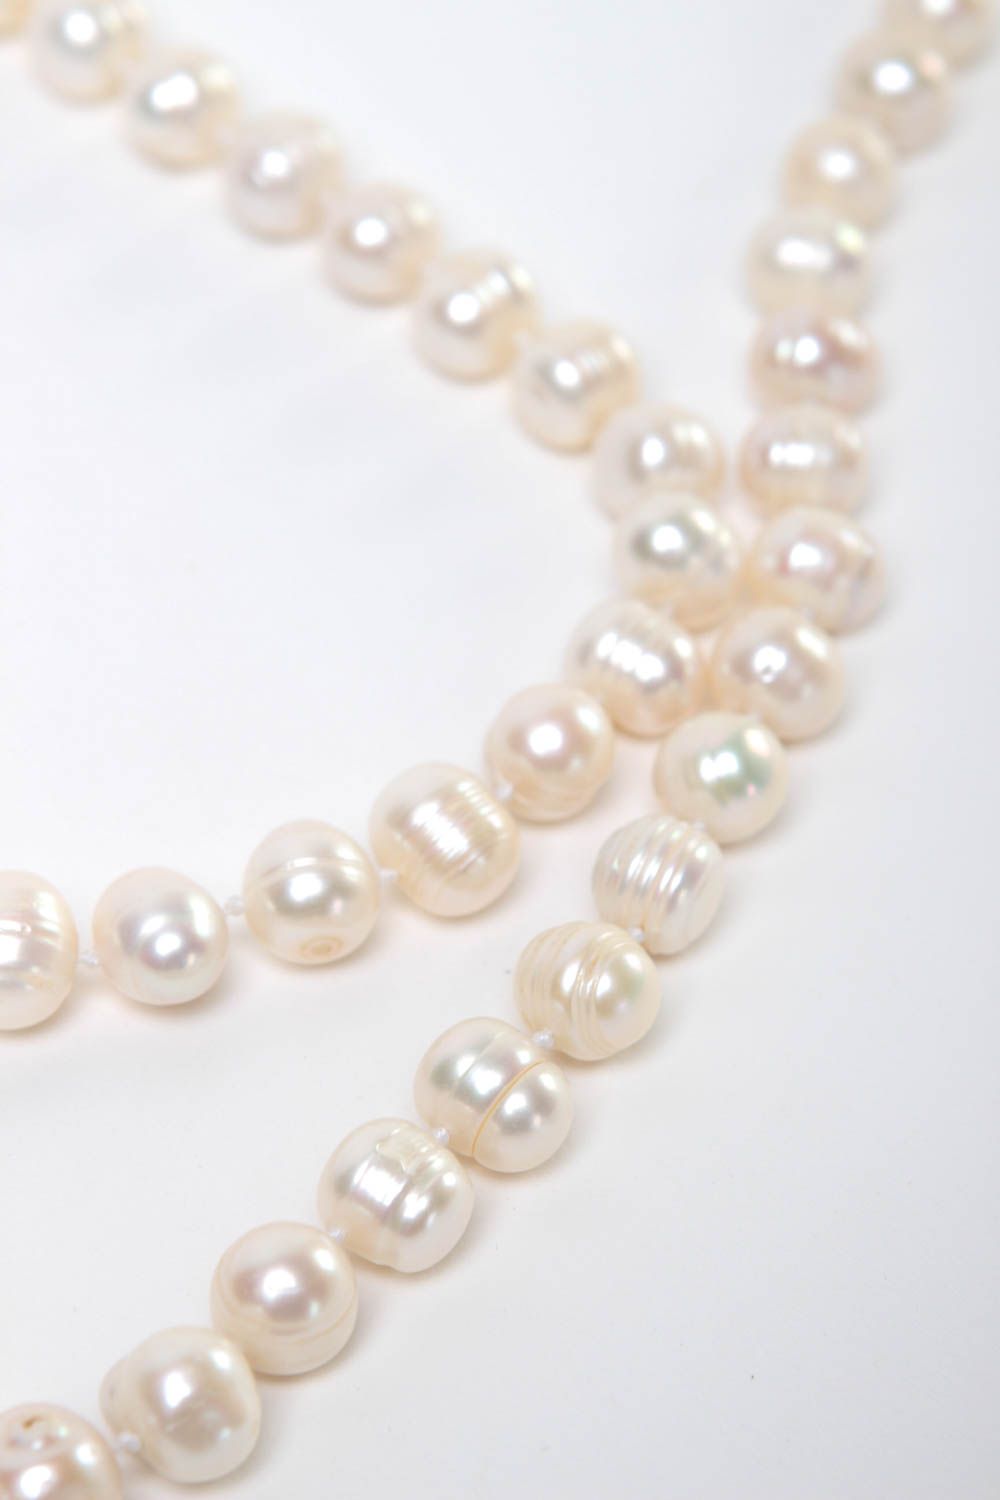 Handmade necklace pearl necklace designer jewelry womens accessories gift ideas photo 3